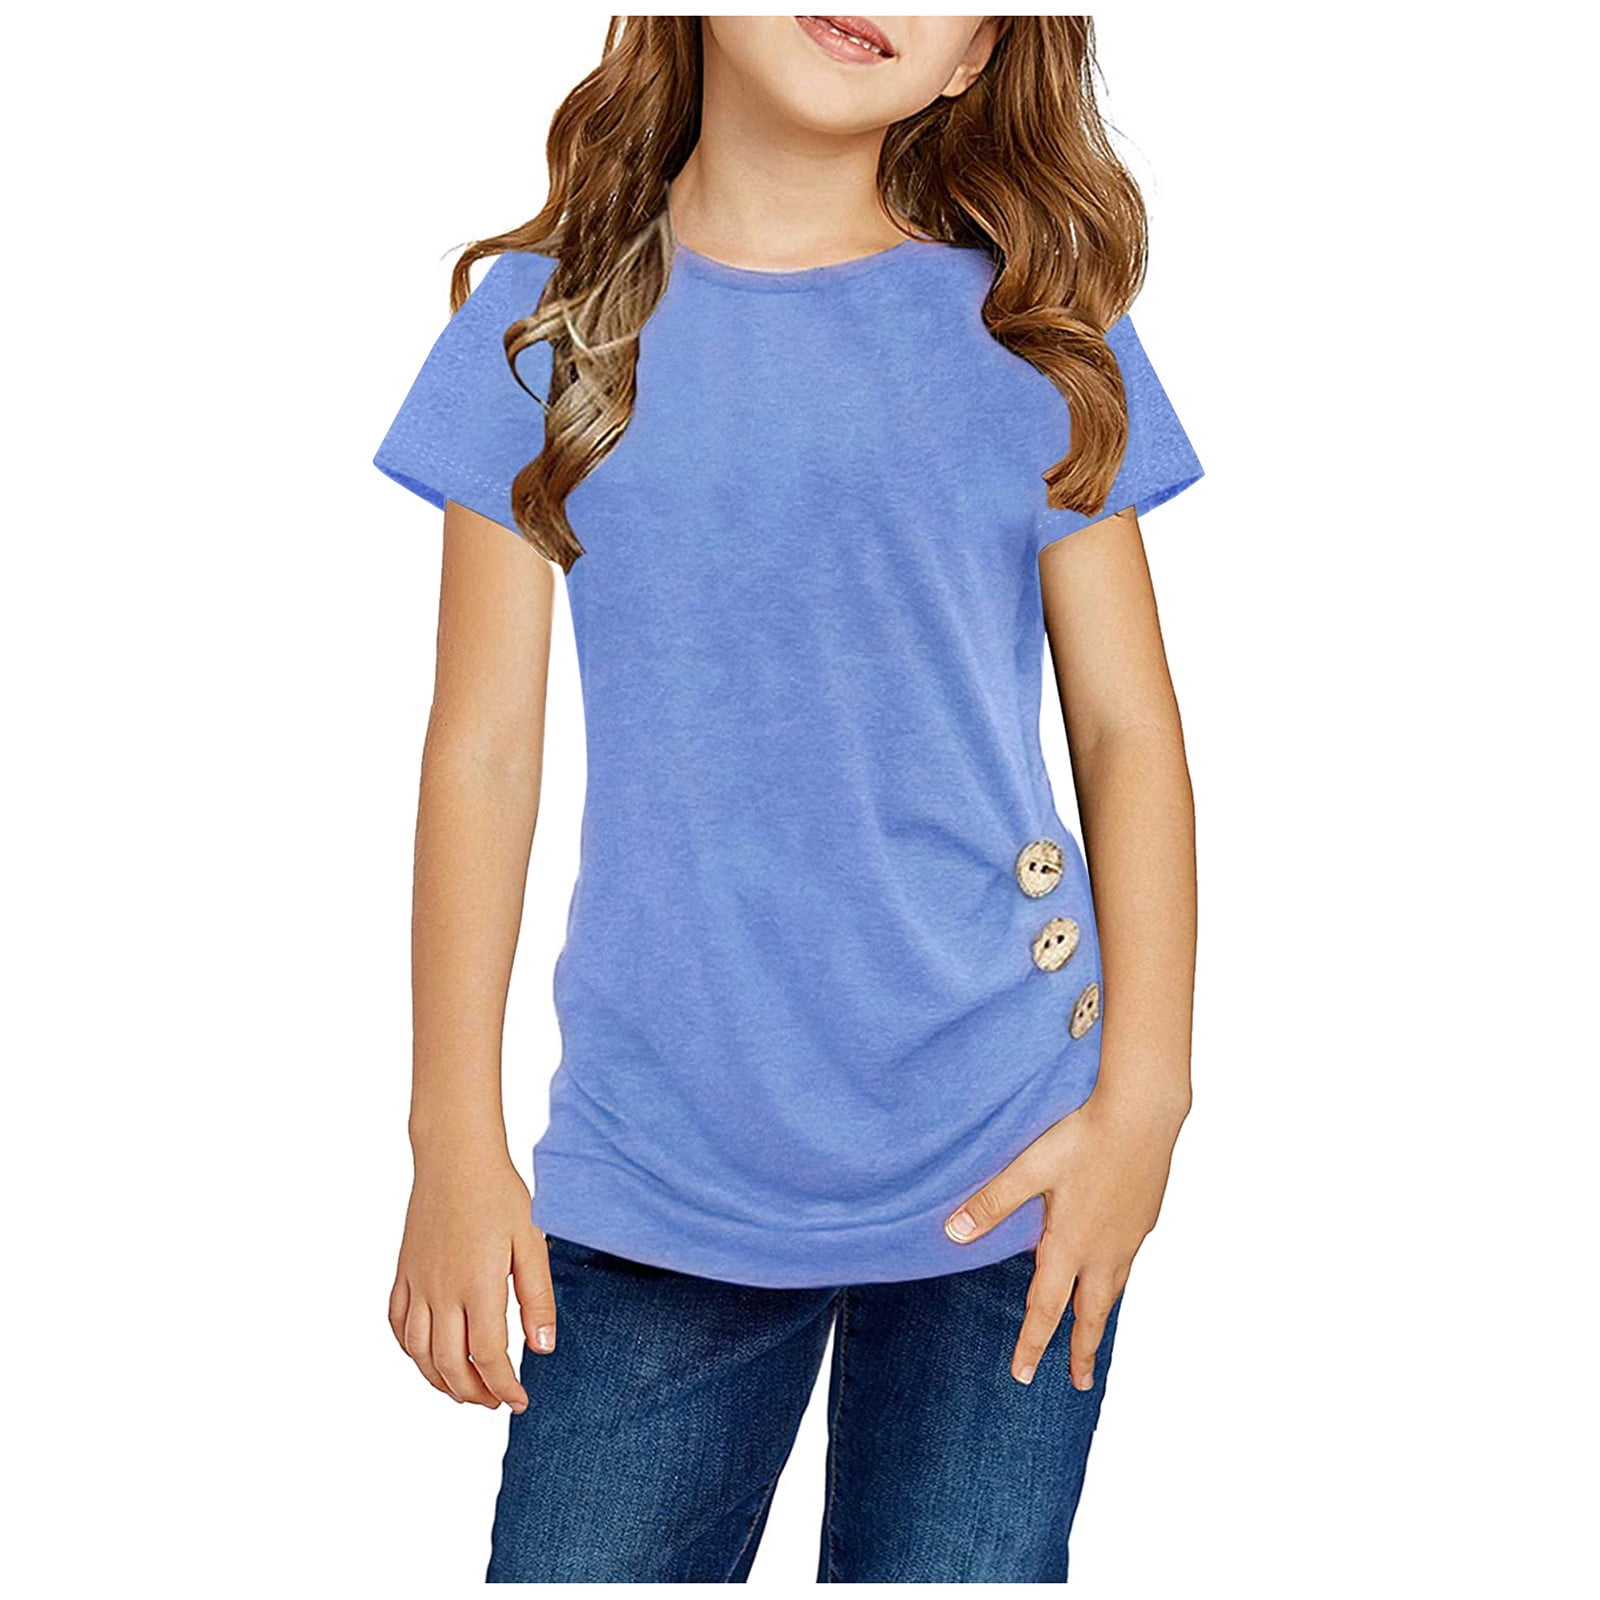 Knot Tunic Button Short Girls Sleeve TShirt Casual Tops Front Blouse ...